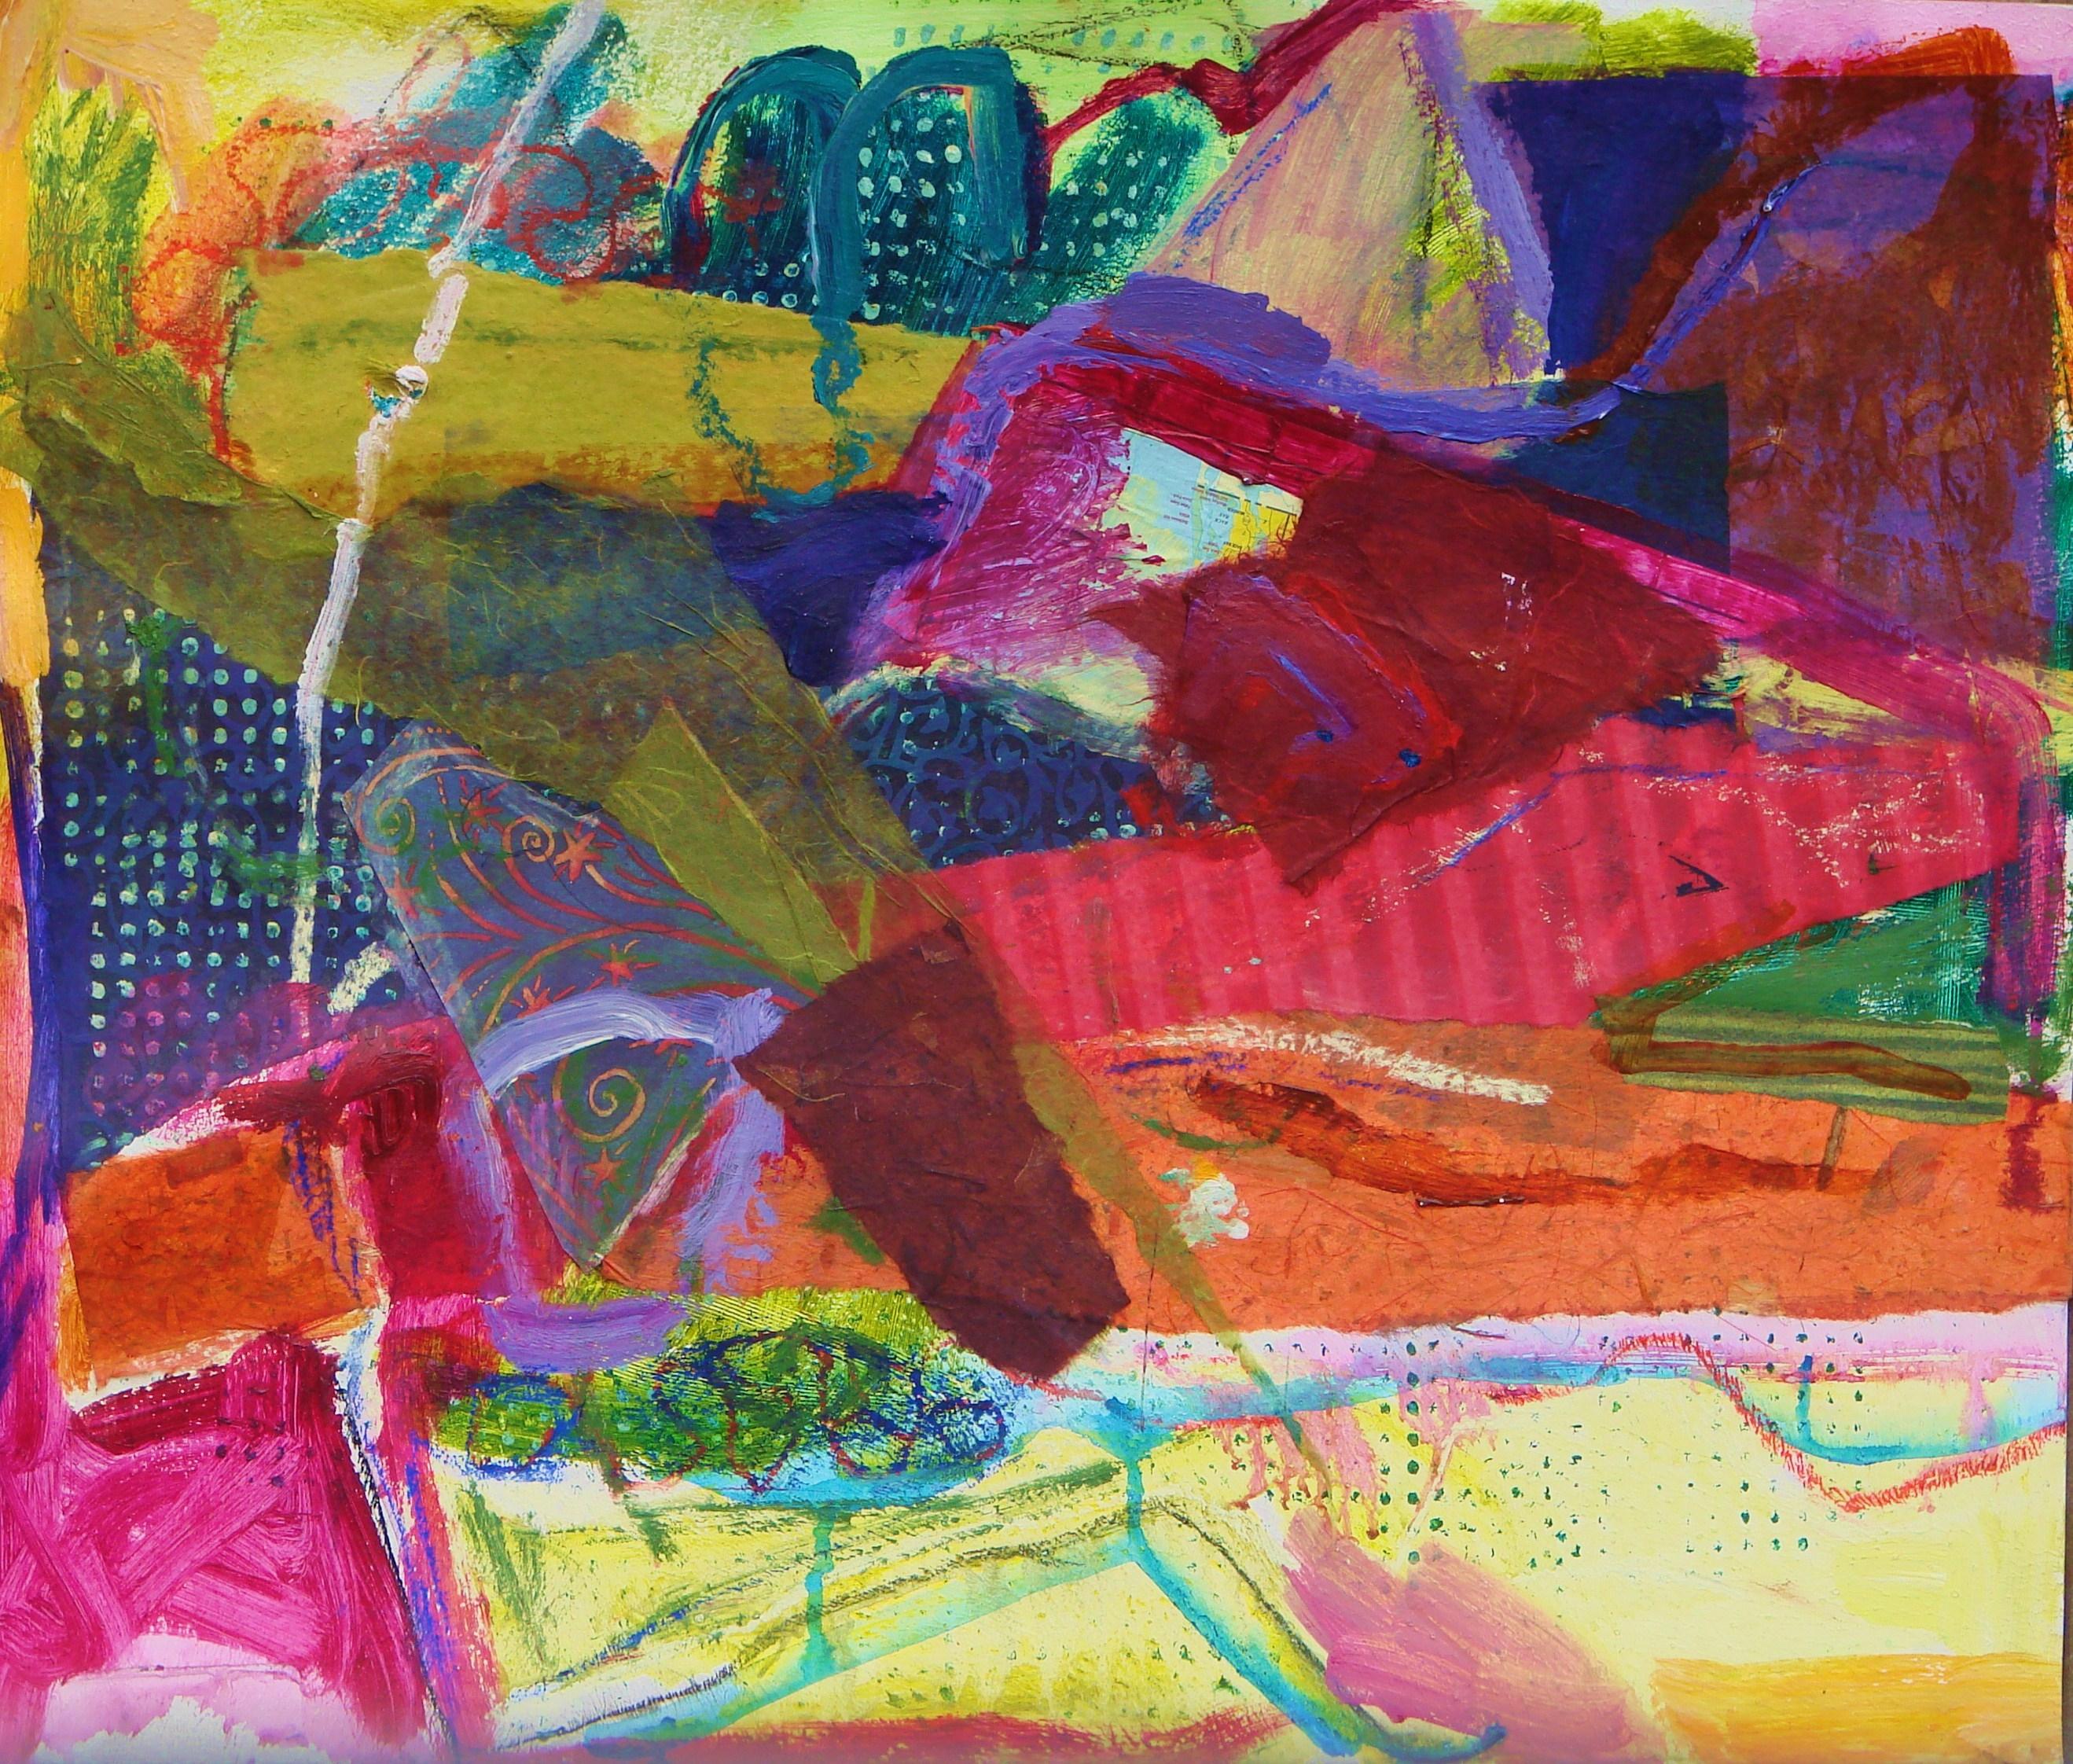 Abstract Landscape #1, Mixed Media on Paper - Mixed Media Art by Linda Bankerd